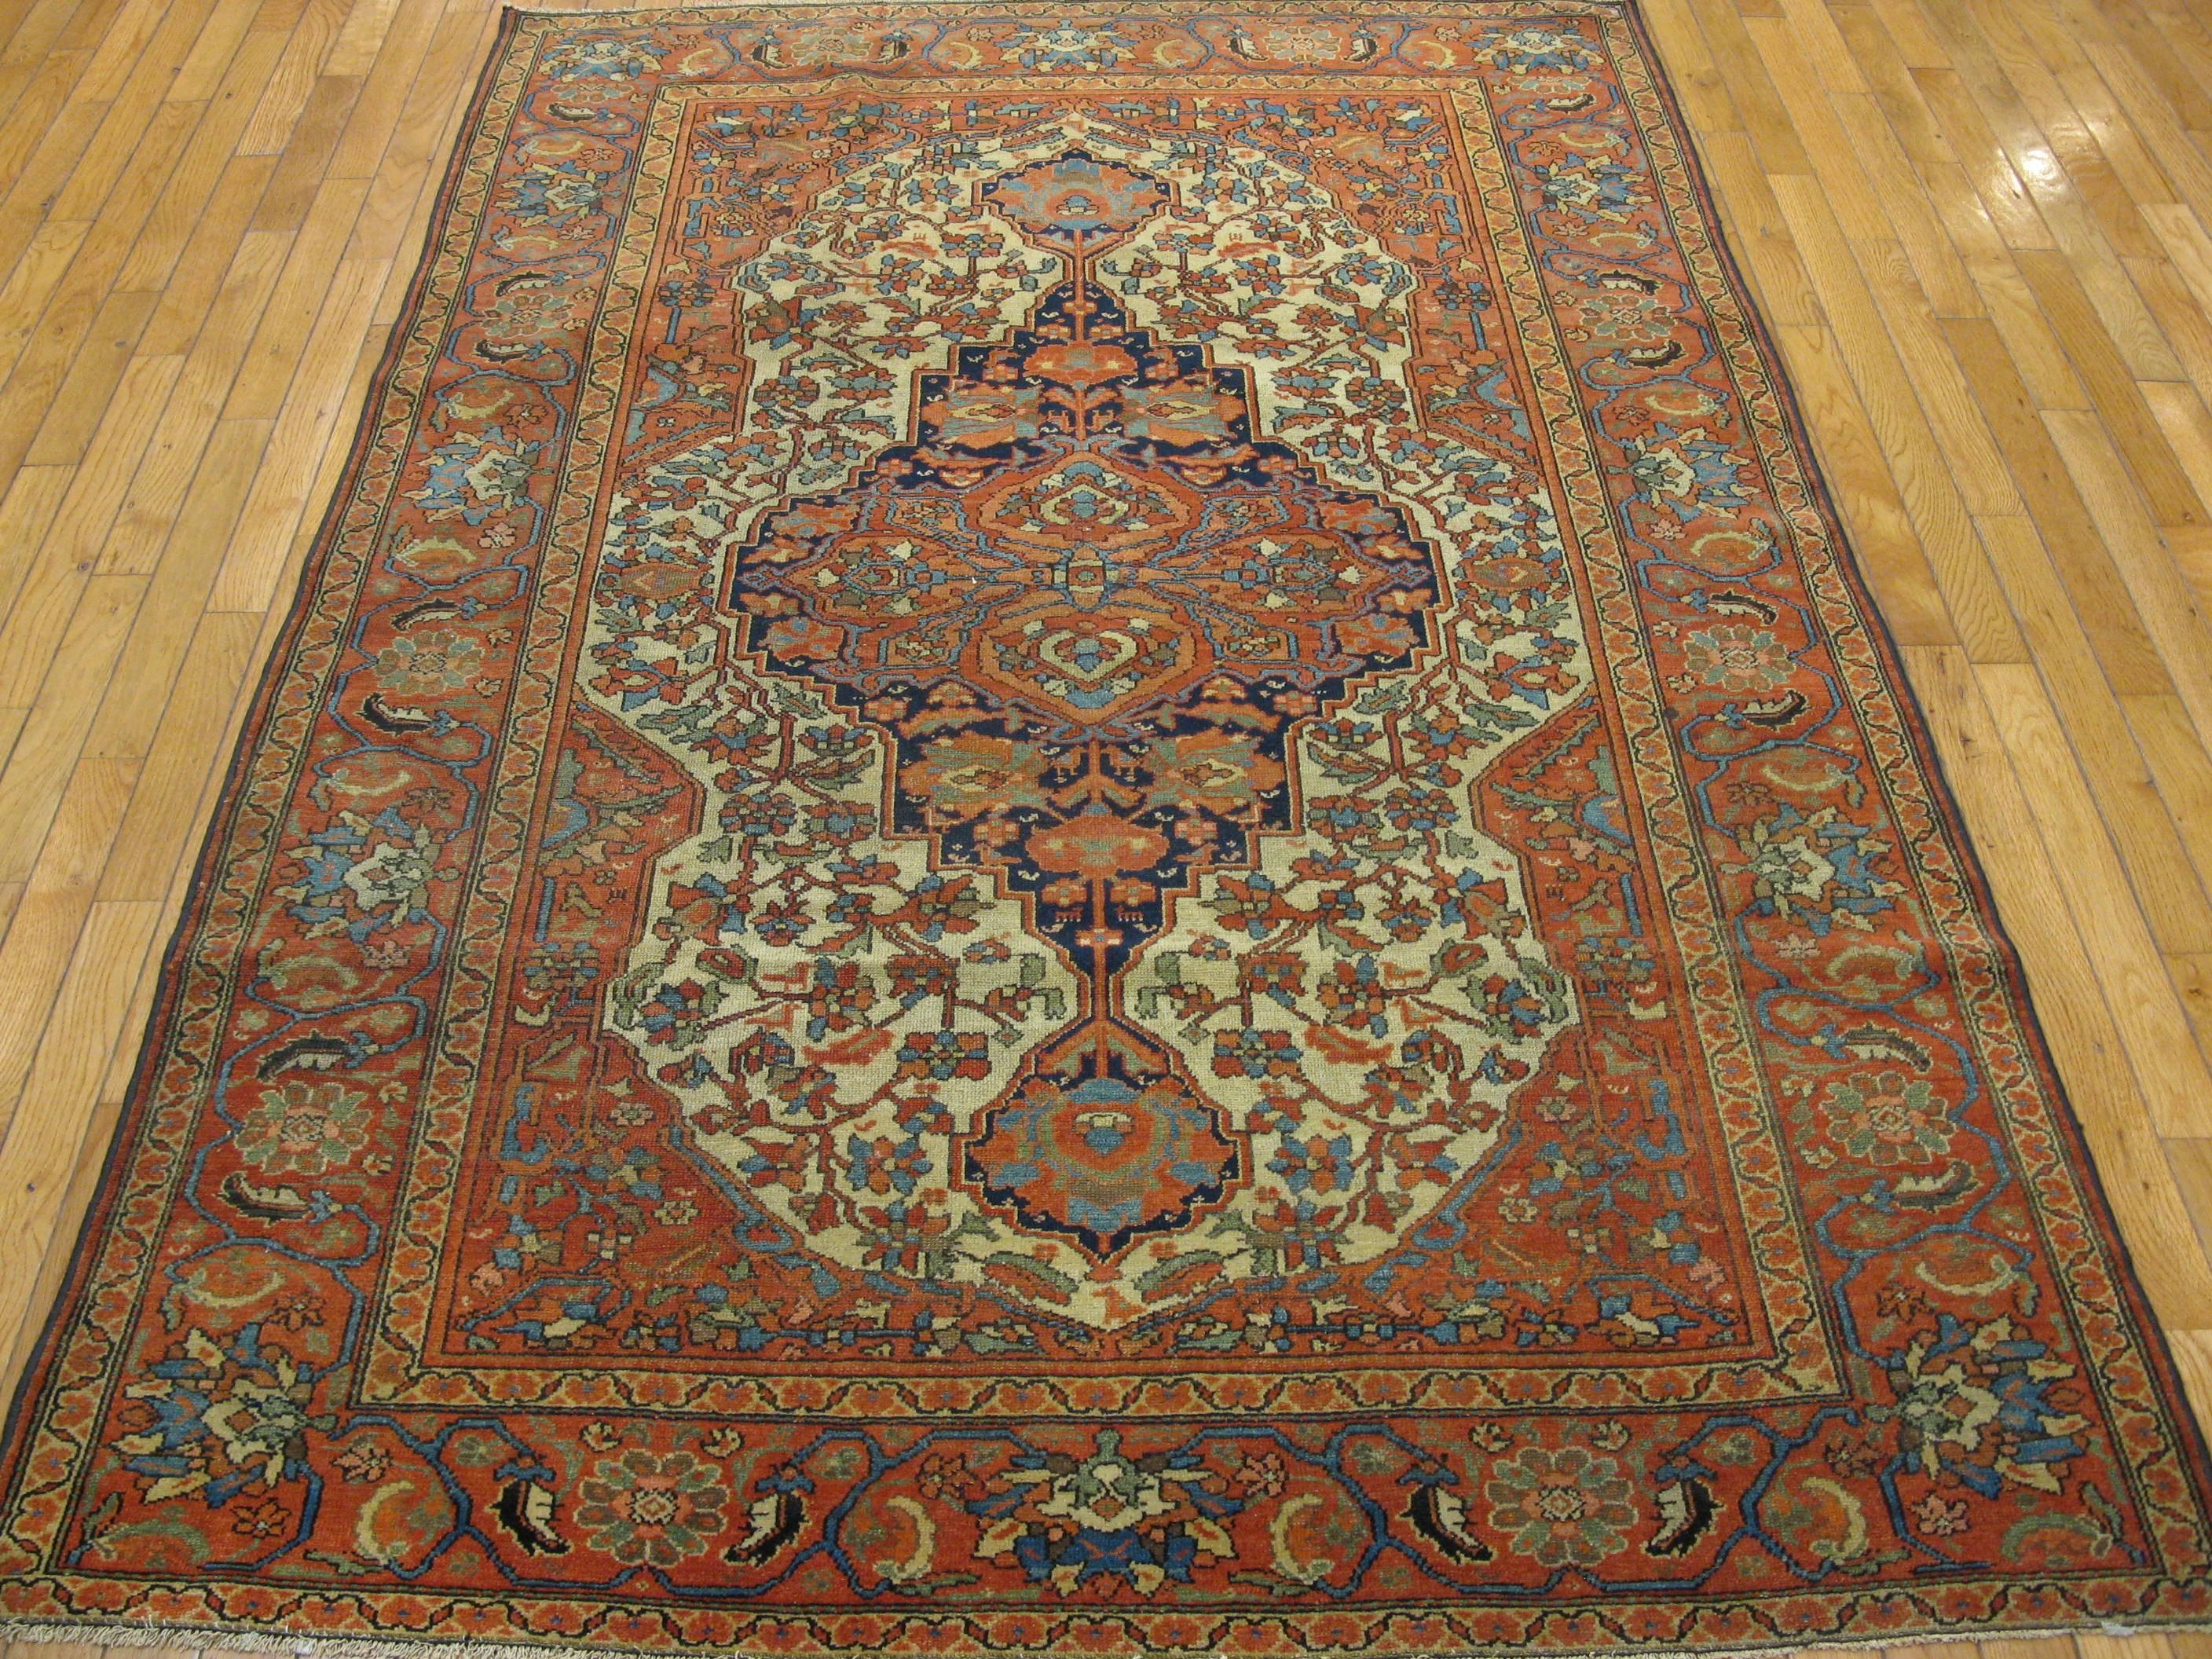 A small antique hand-knotted rug from the city of Malayer in west central Iran. The rug measures 4' 5'' x 6' 6'' made with wool pile and cotton foundation. It represents the finer quality rugs from this area.